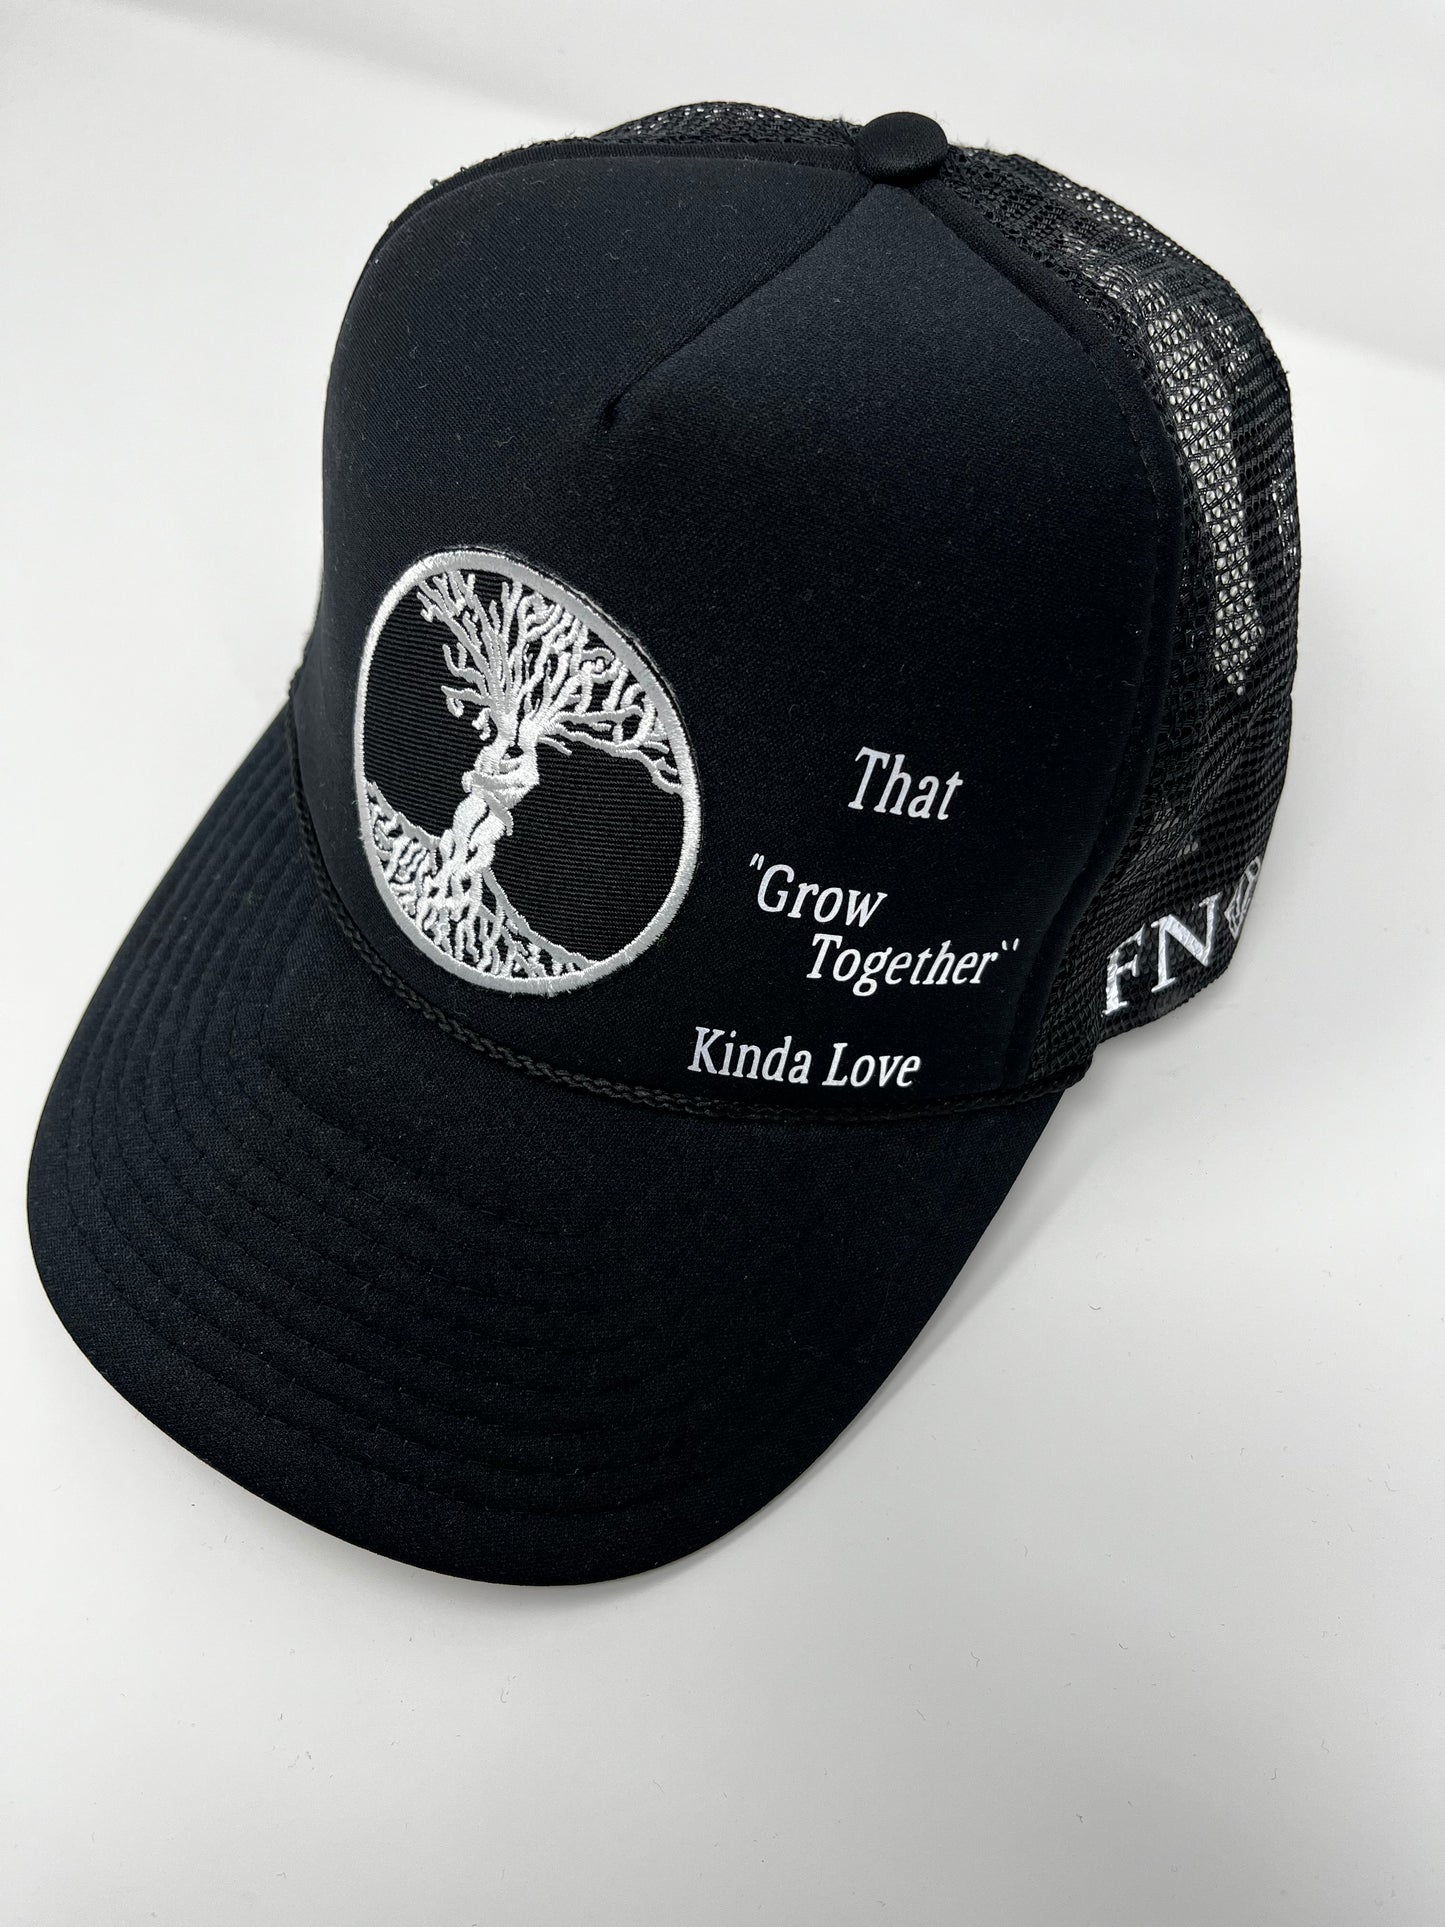 Grow together trucker hat